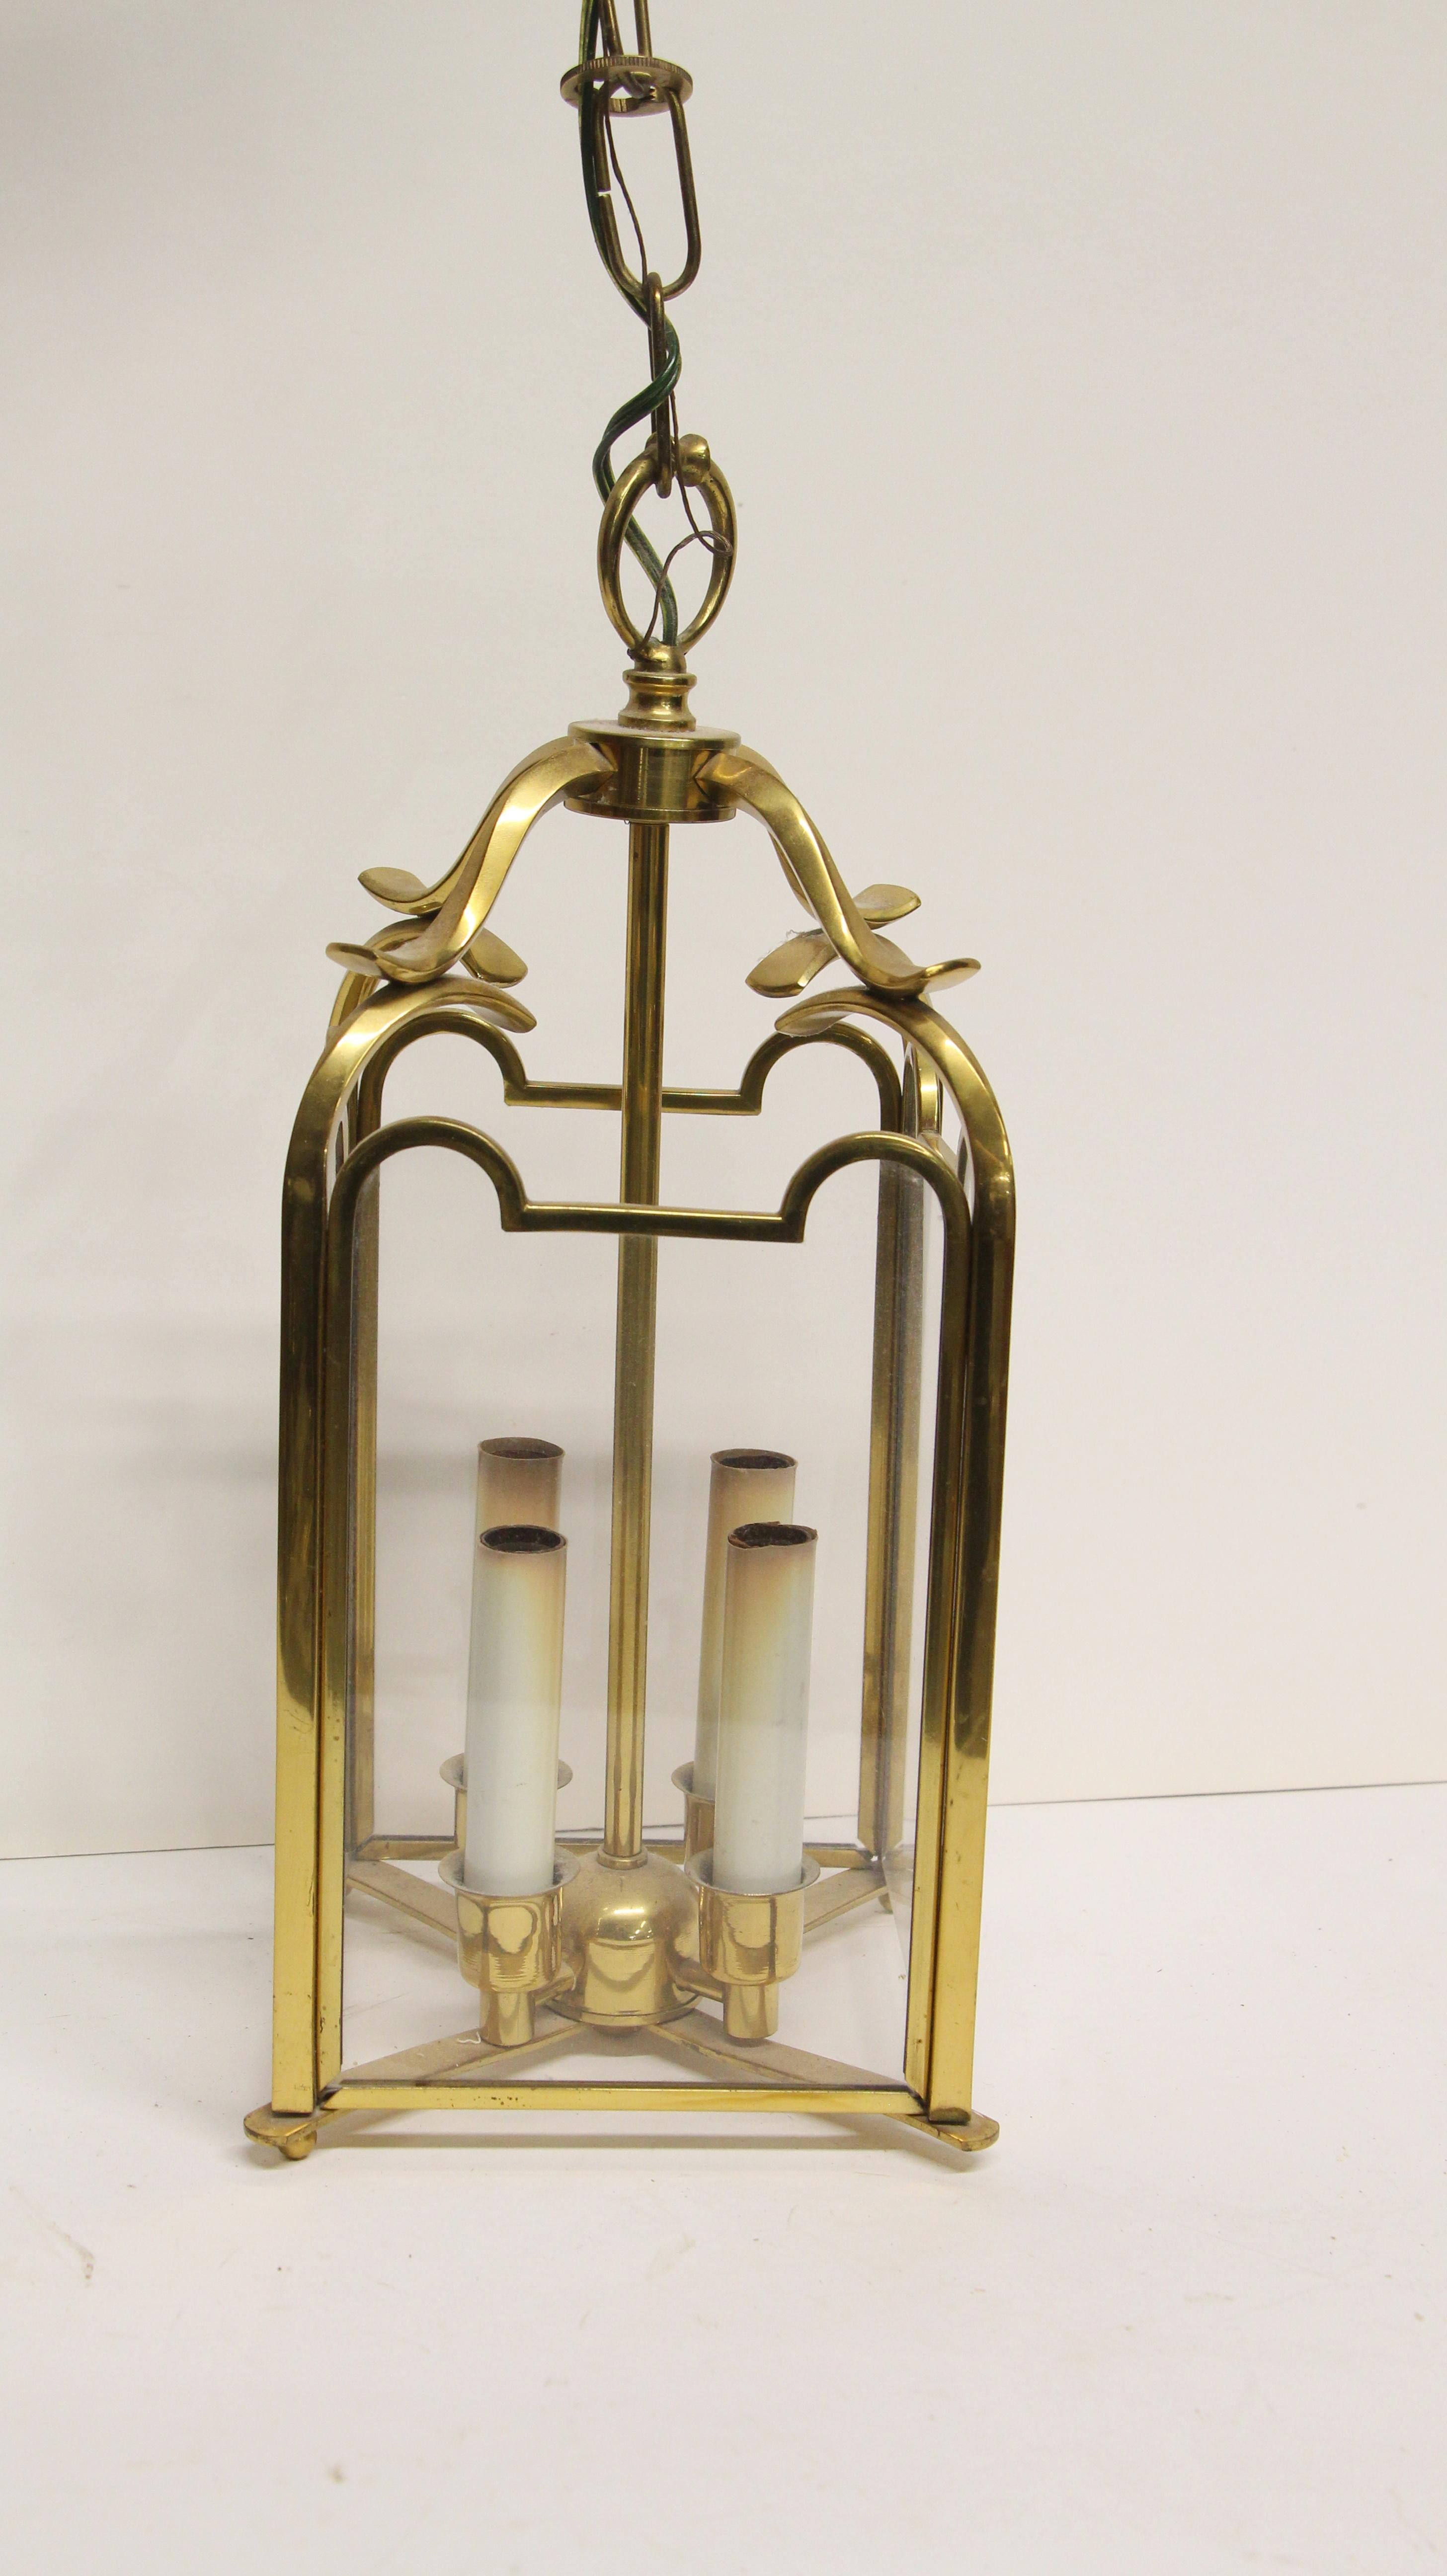 This is from the 1980s NYC Waldorf Astoria Hotel. Four-light glass and polished brass pendant lantern. Waldorf Astoria authenticity card included with your purchase. This can be seen at our 400 Gilligan St location in Scranton, PA.